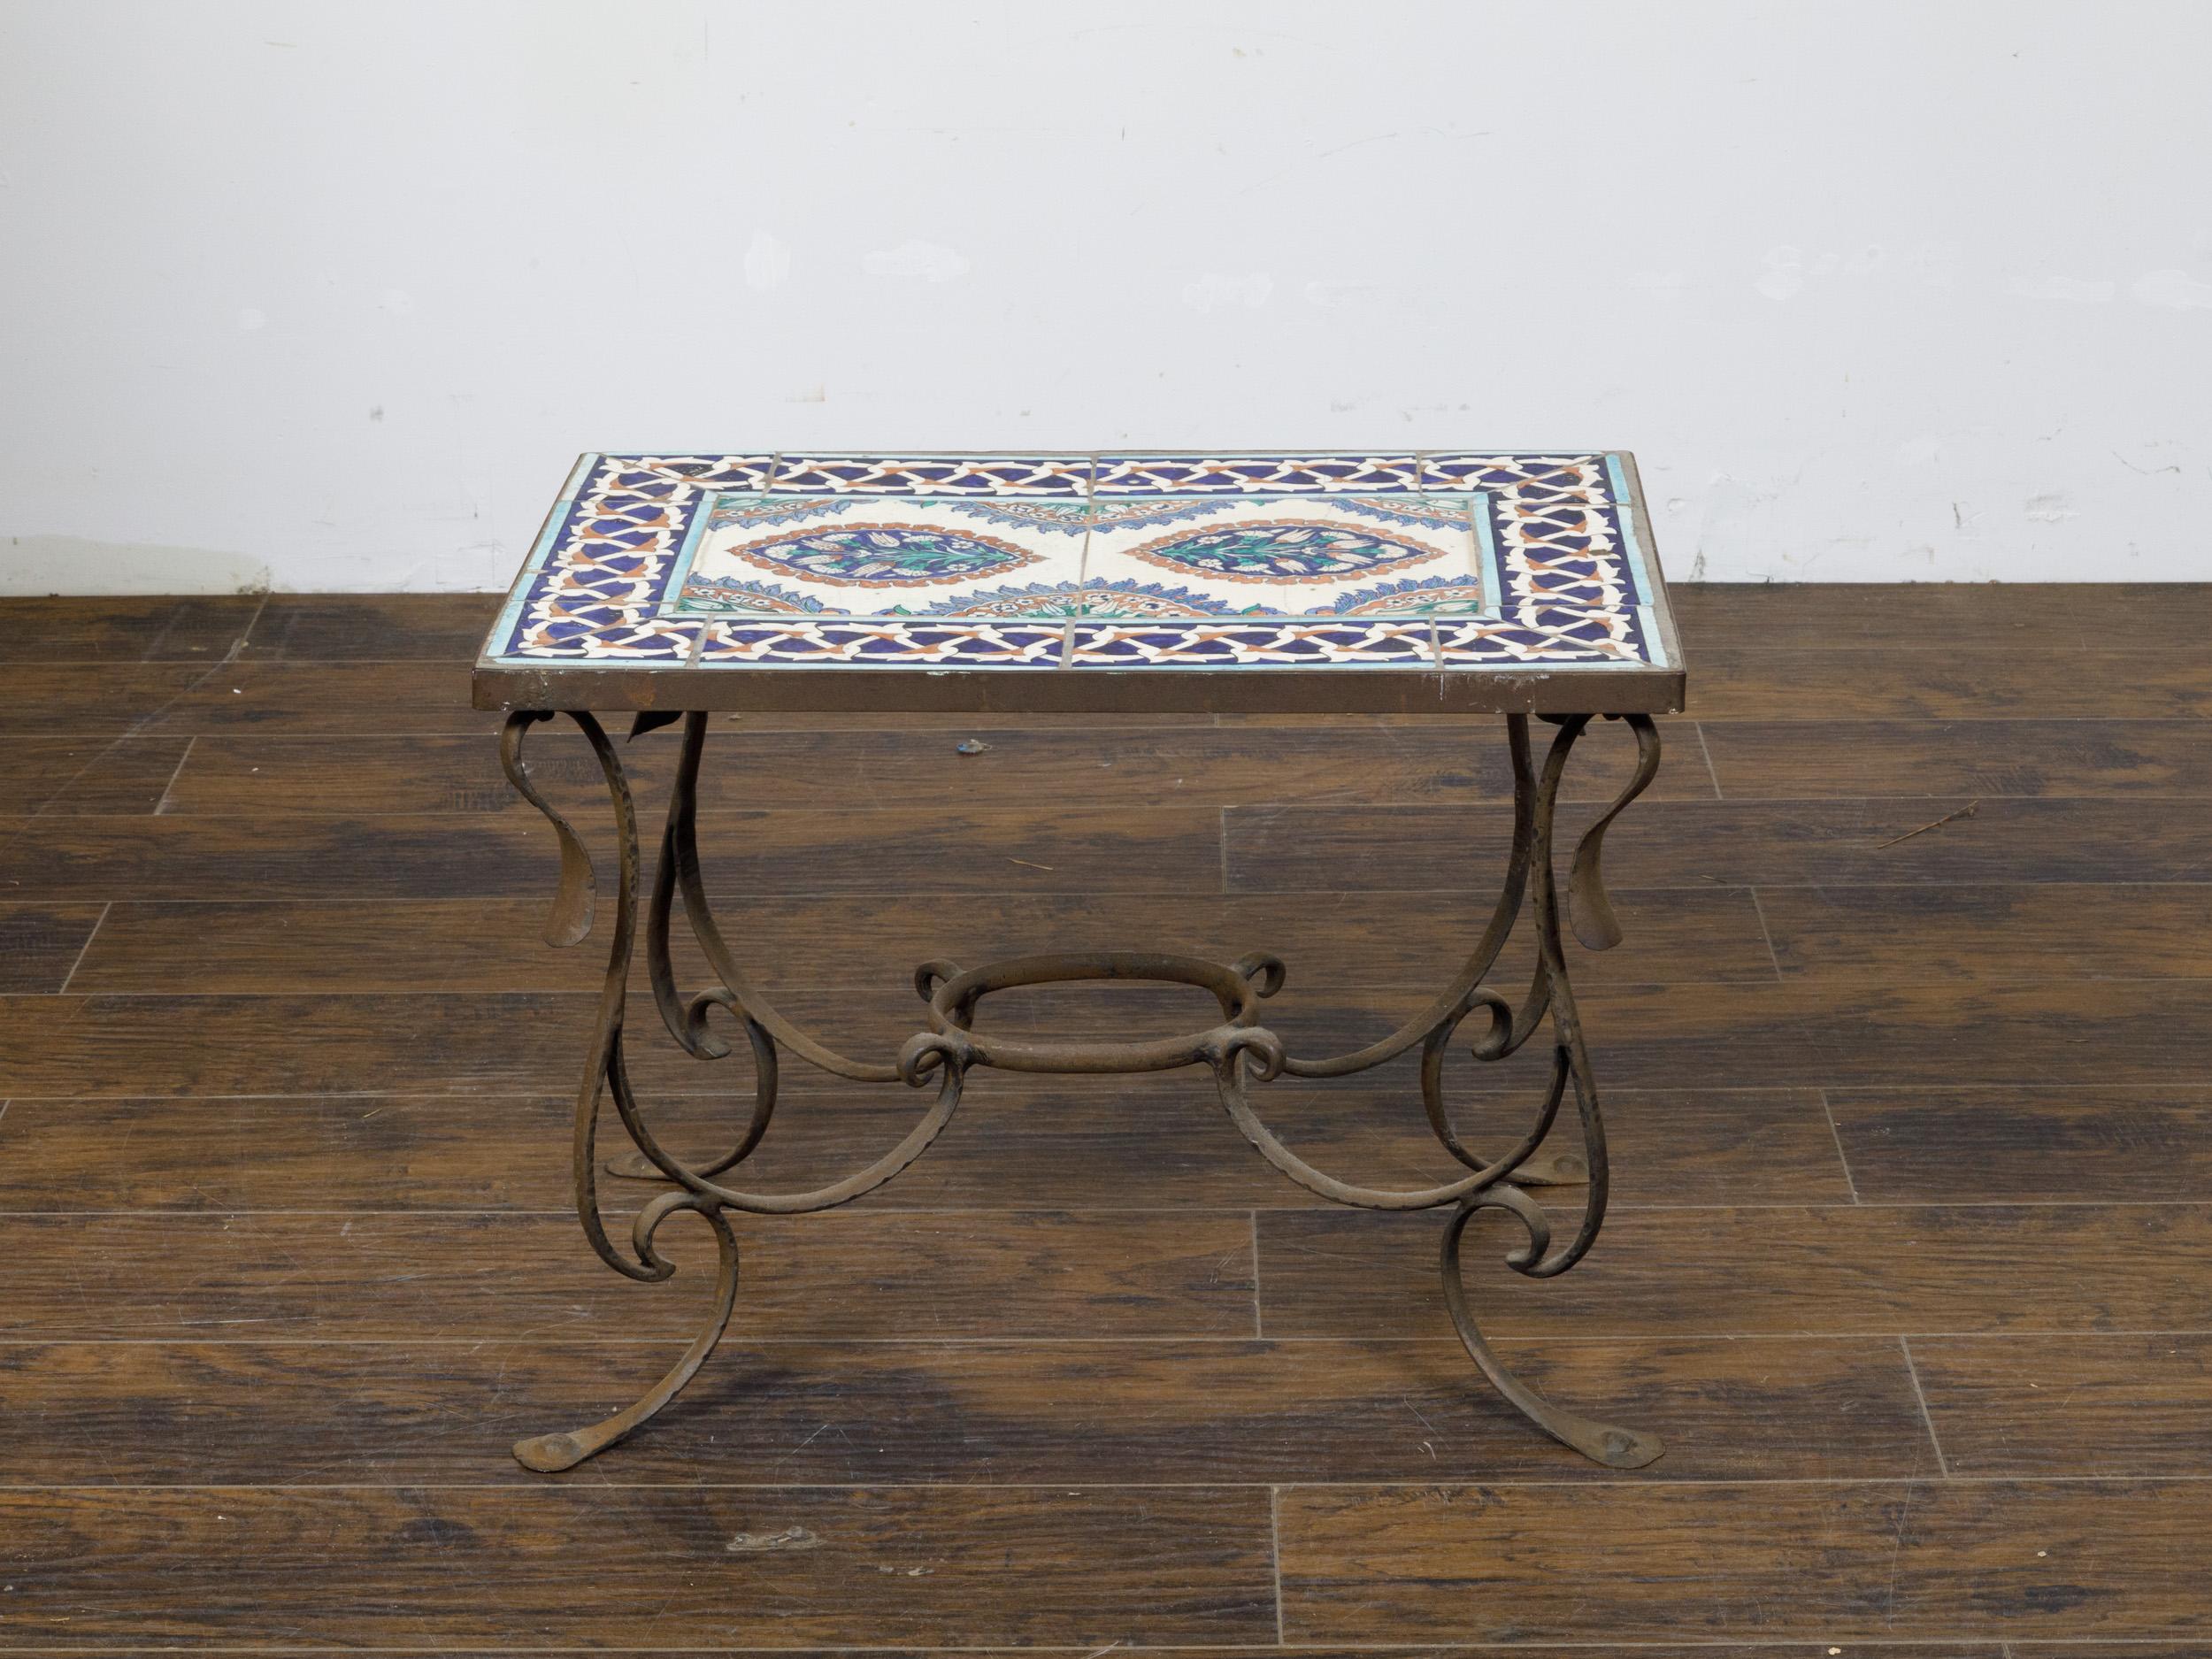 Midcentury Italian Wrought-Iron Coffee Table with Tile Top and Scrolling Base For Sale 6